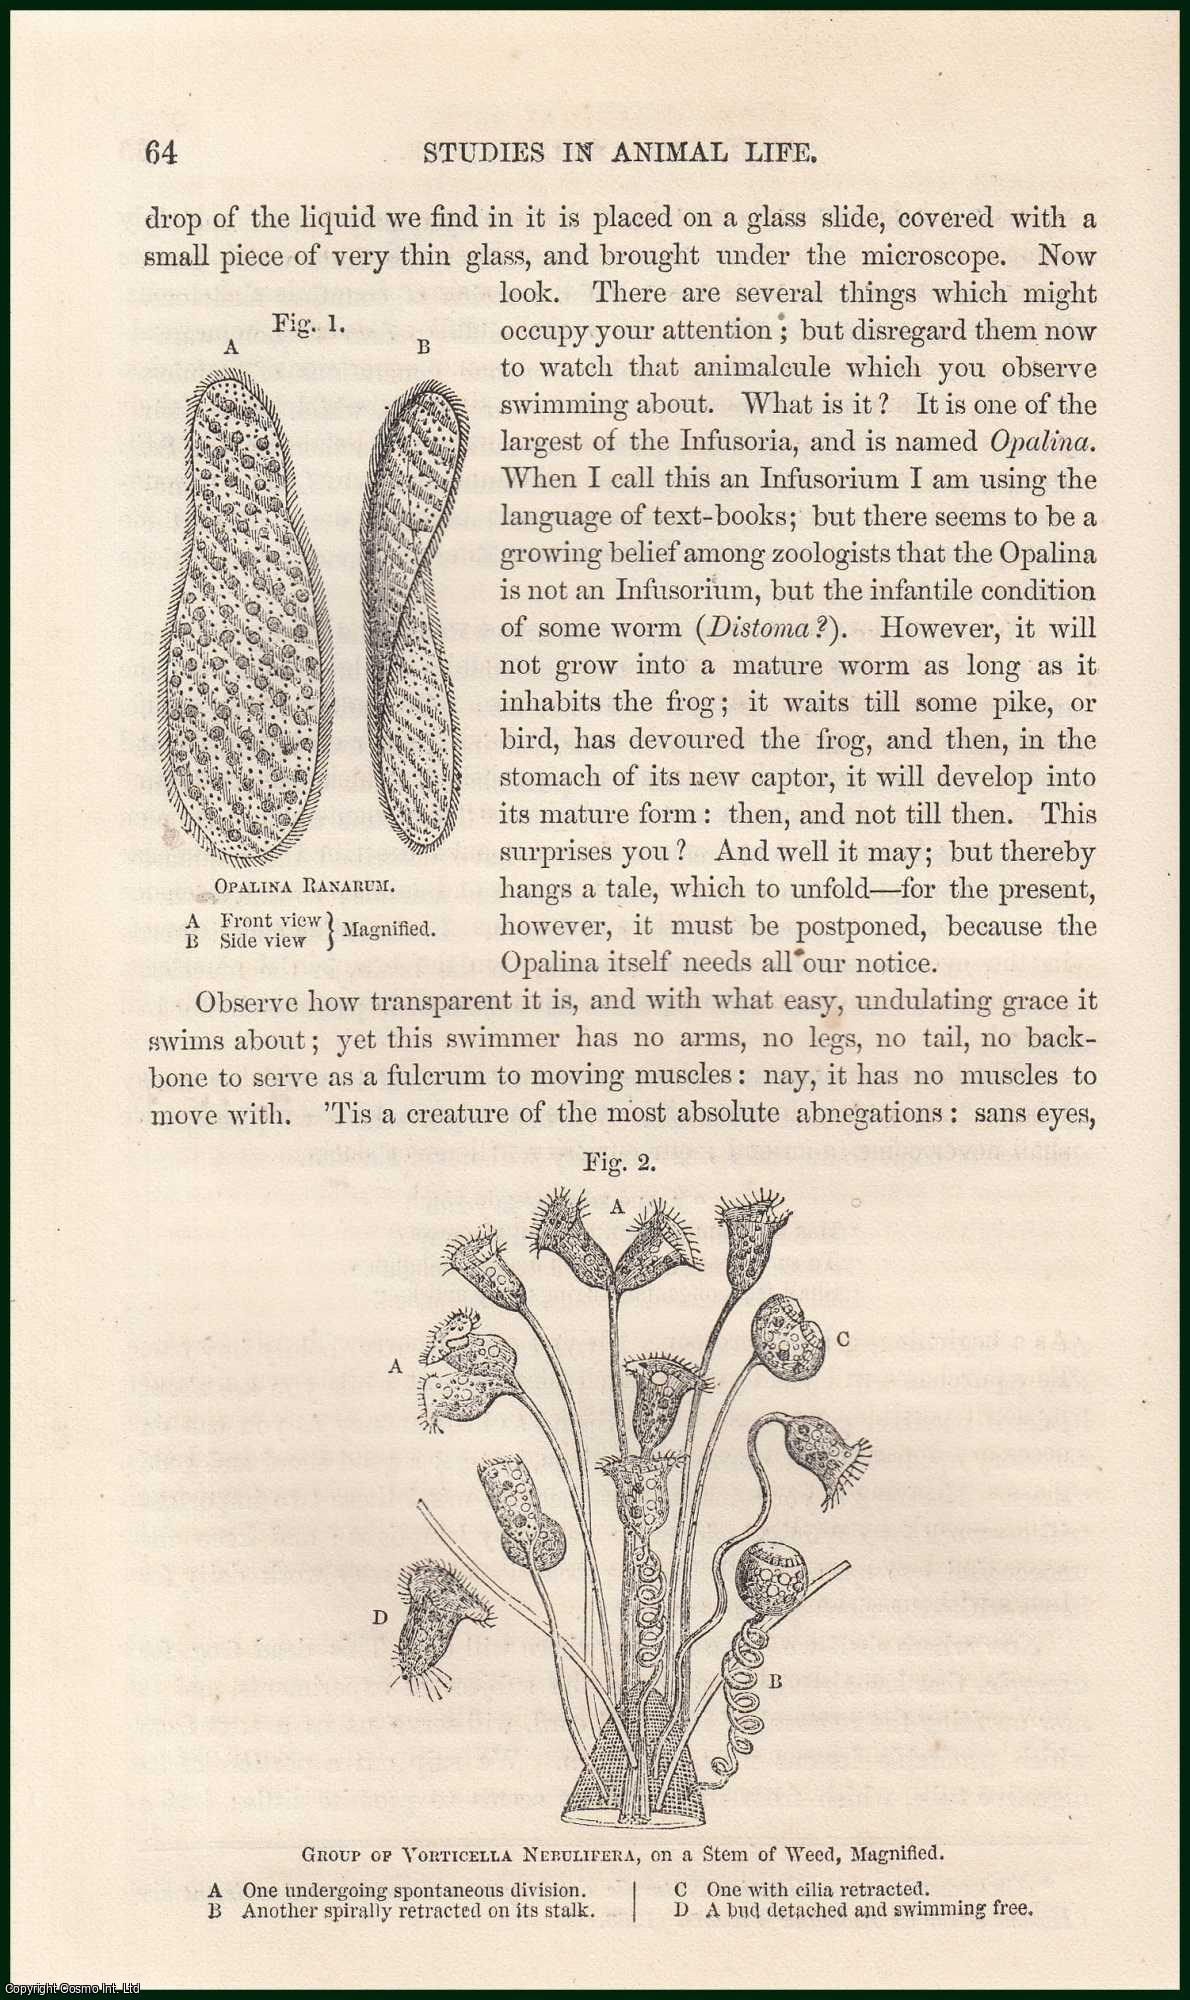 G.H. Lewes - Studies in Animal Life (part 1). An uncommon original article from the Cornhill Magazine, 1860.